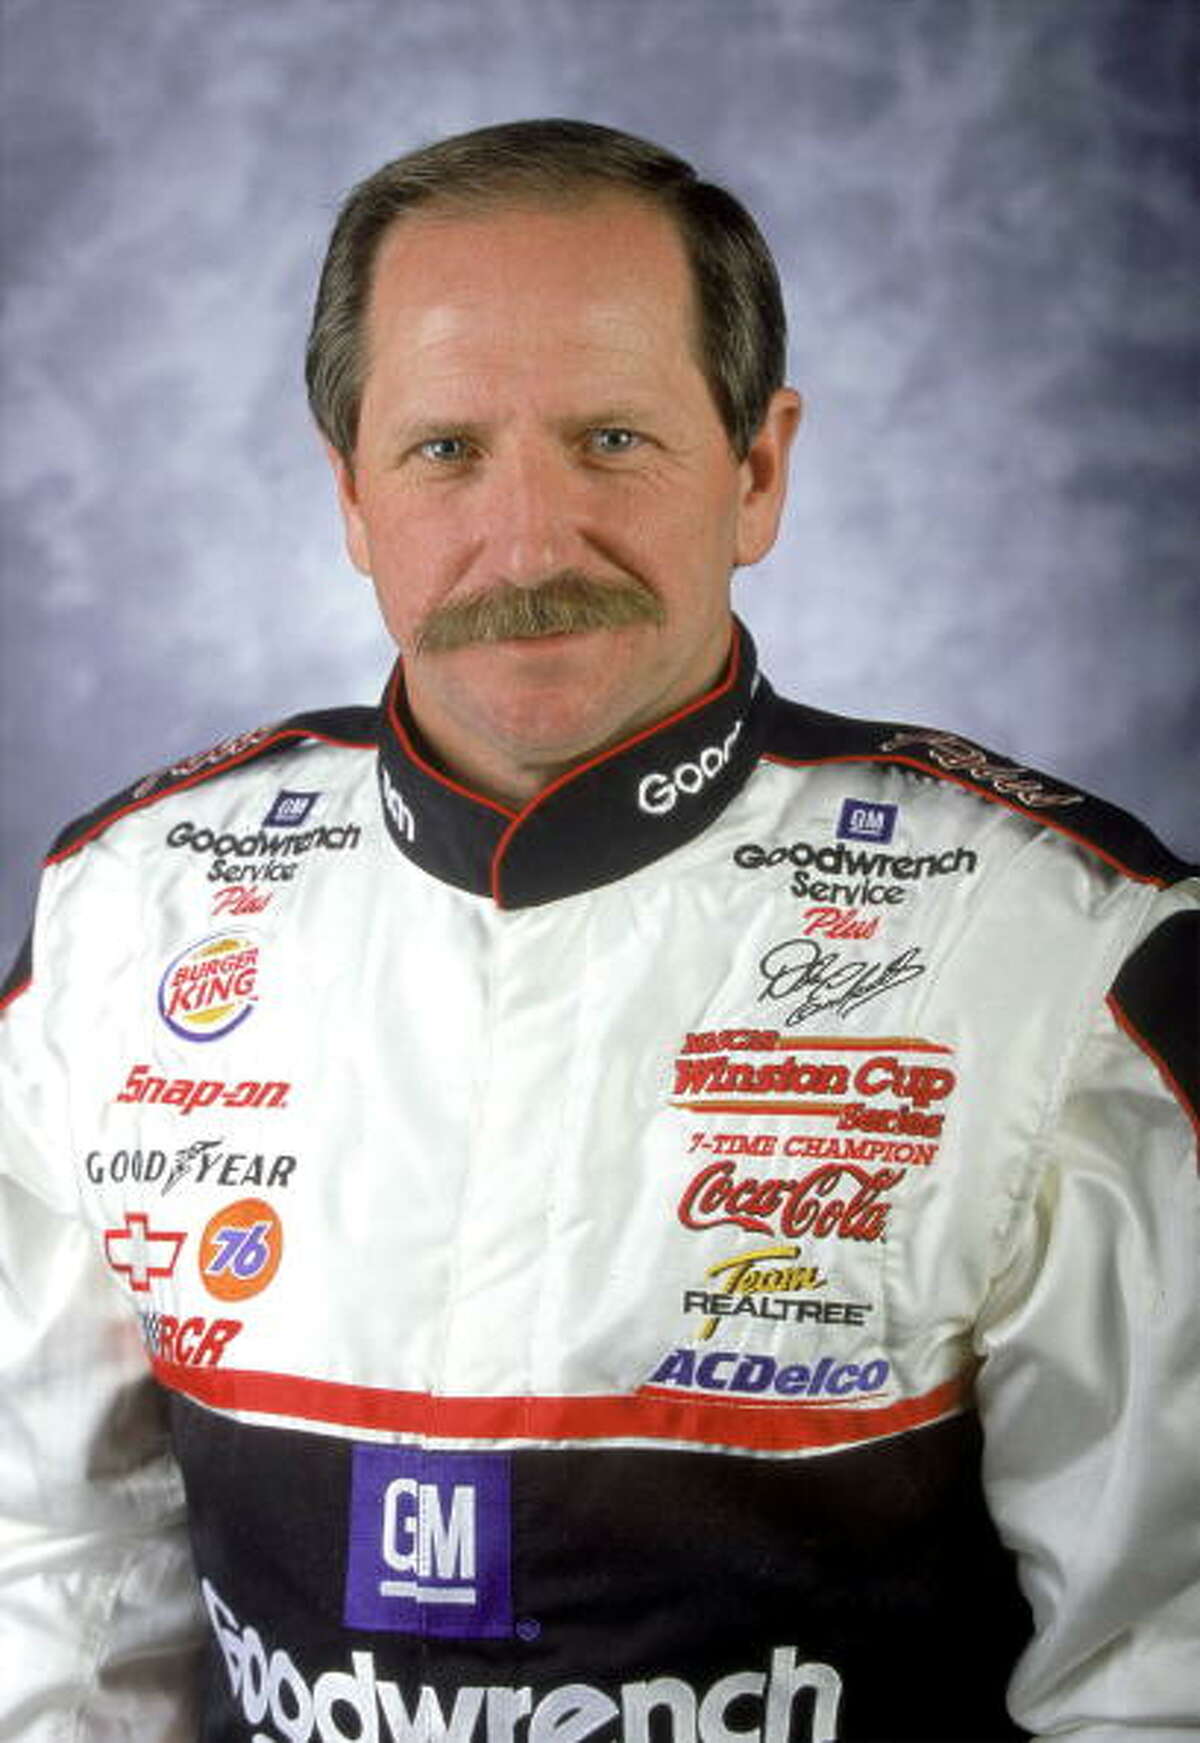 Dale Earnhardt The seven-time champion NASCAR driver raced for the last time in the 2001 Daytona 500 race. Earnhardt crashed into a wall during the final lap of the race which his son Dale Earnhardt, Jr. was also competing in.